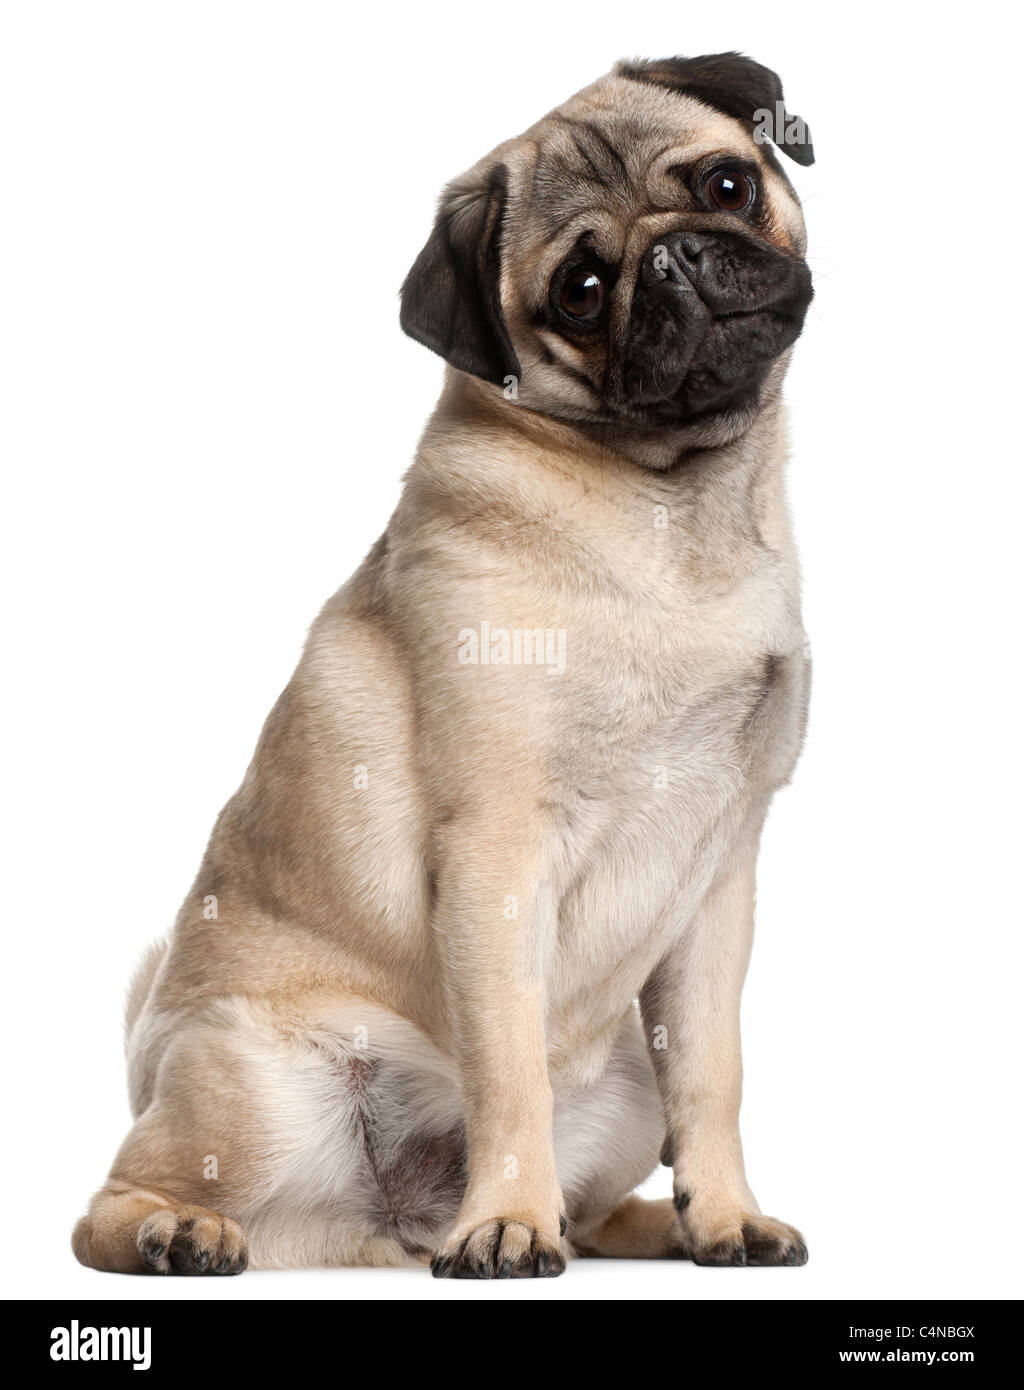 Pug, 8 months old, sitting in front of white background Stock Photo